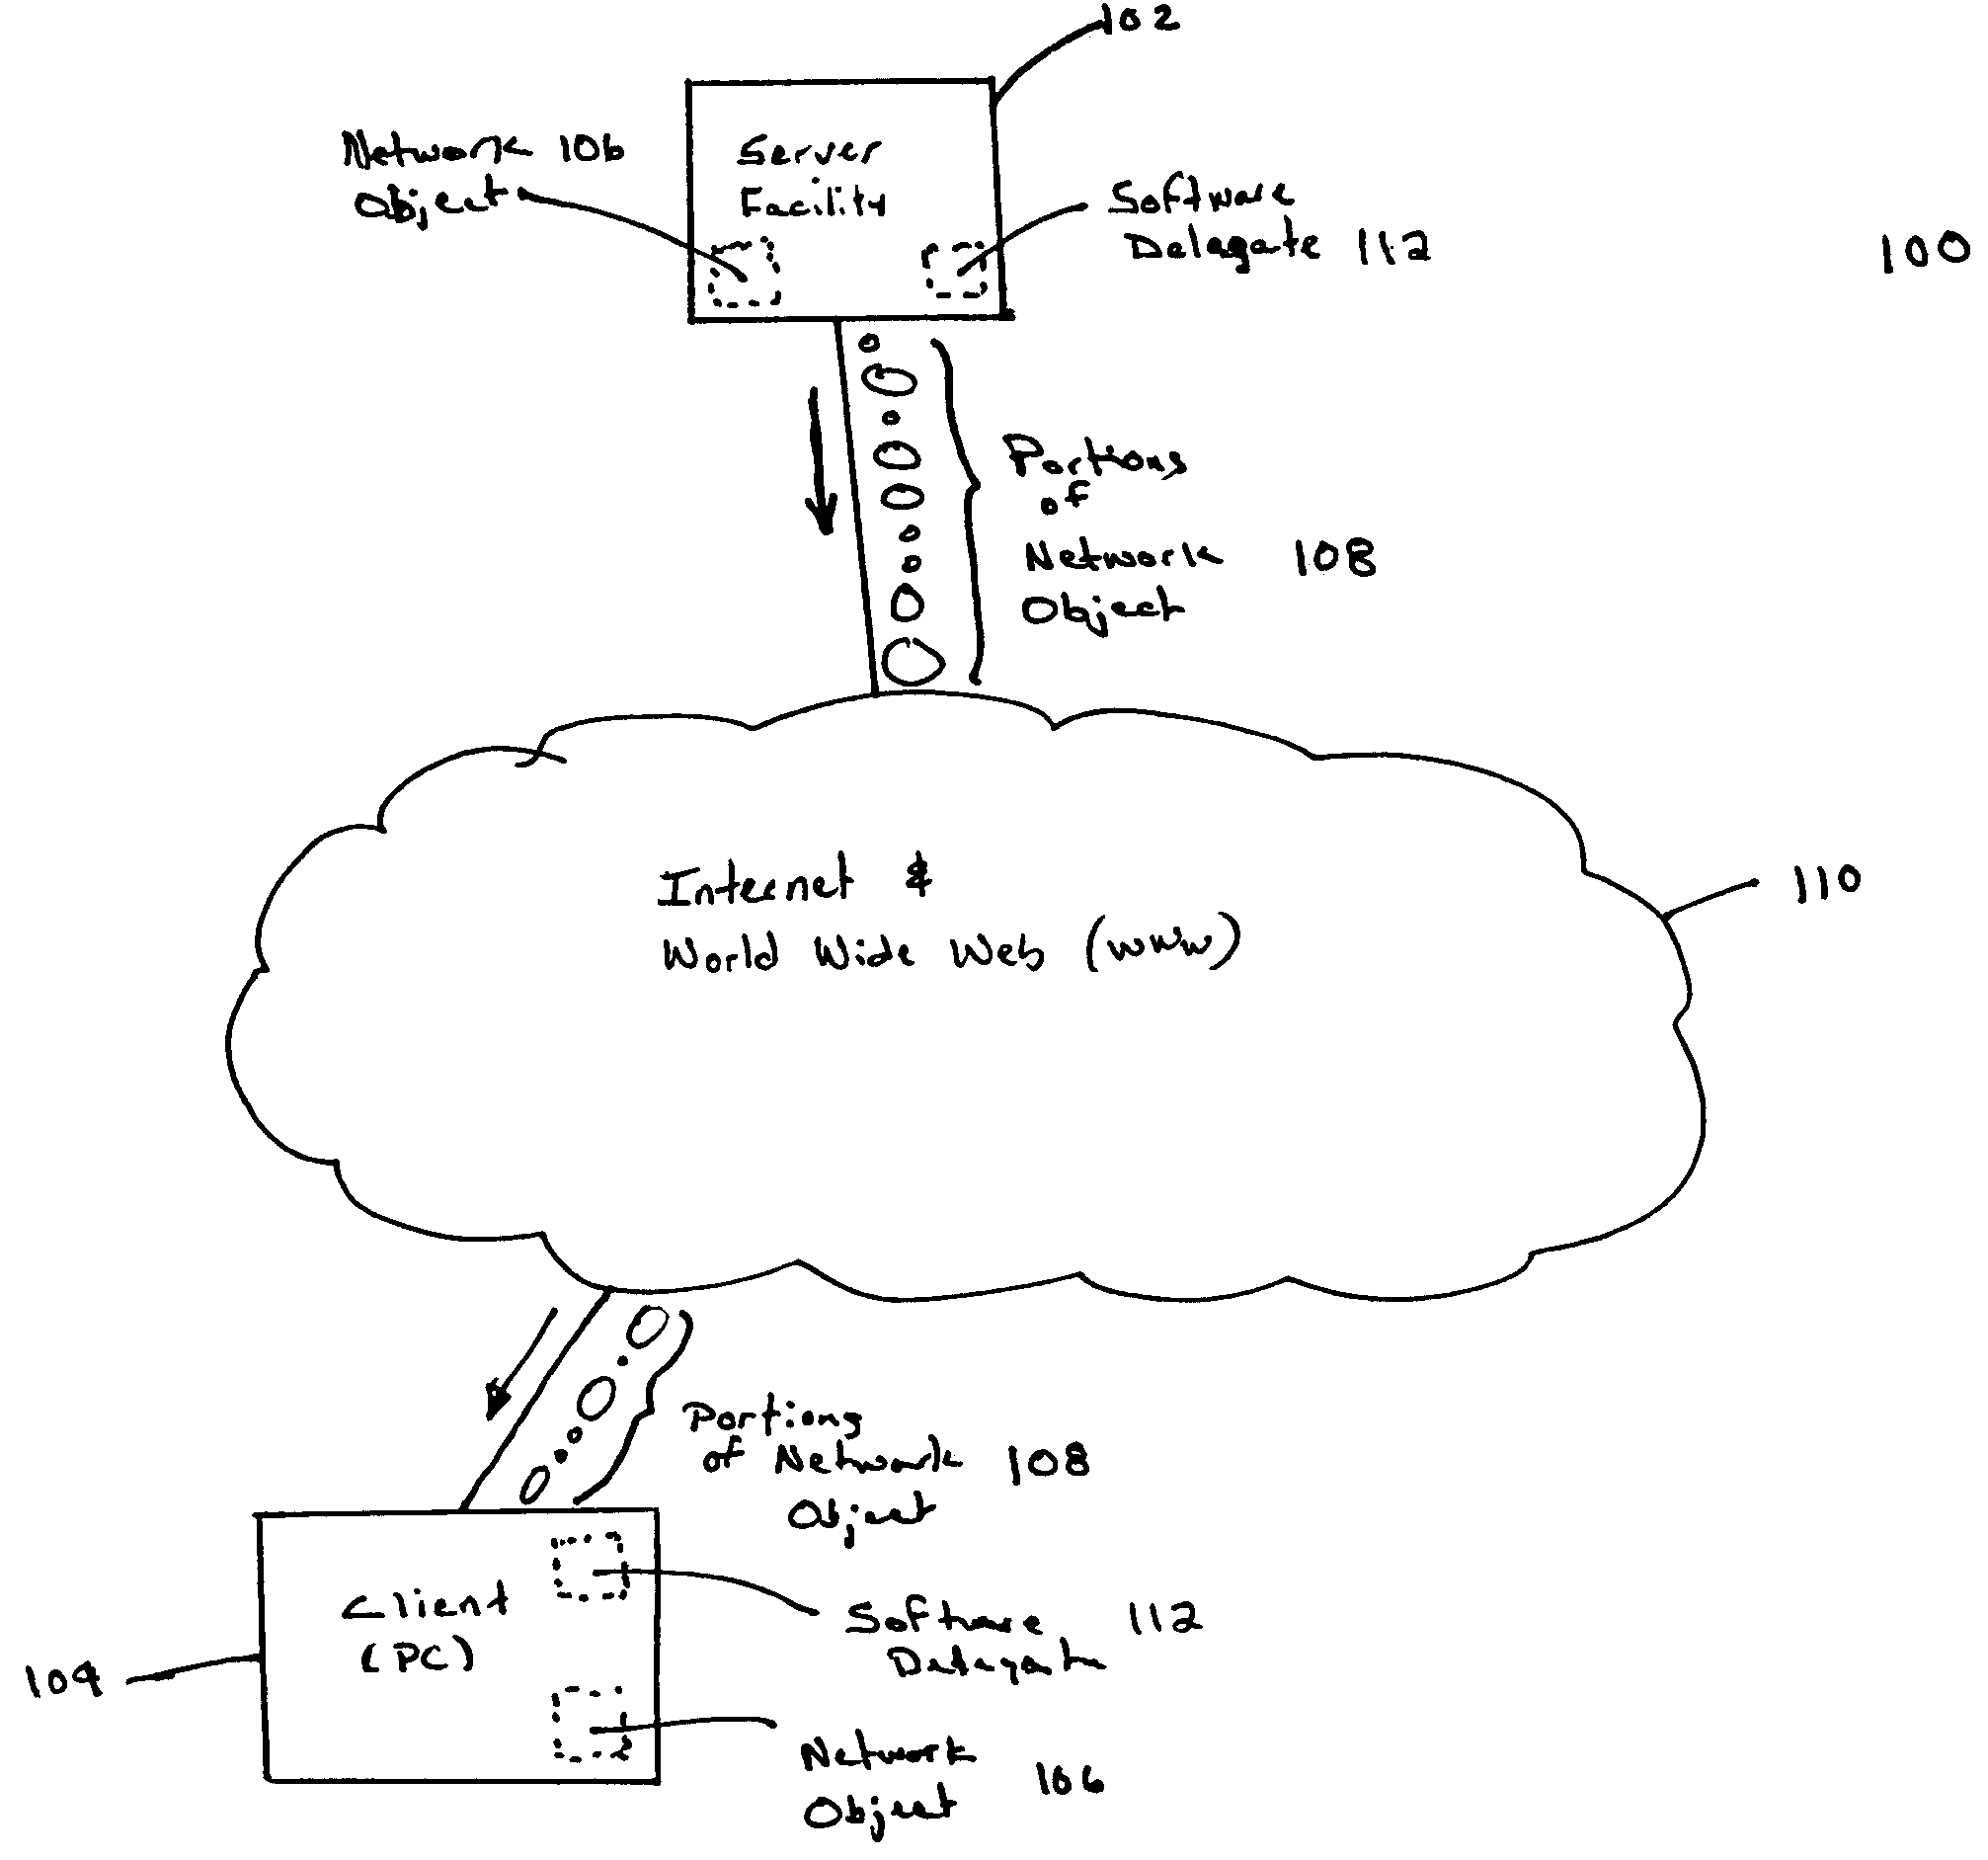 System and method for downloading portions of a remotely located network object to produce a completely downloaded local copy of the network object